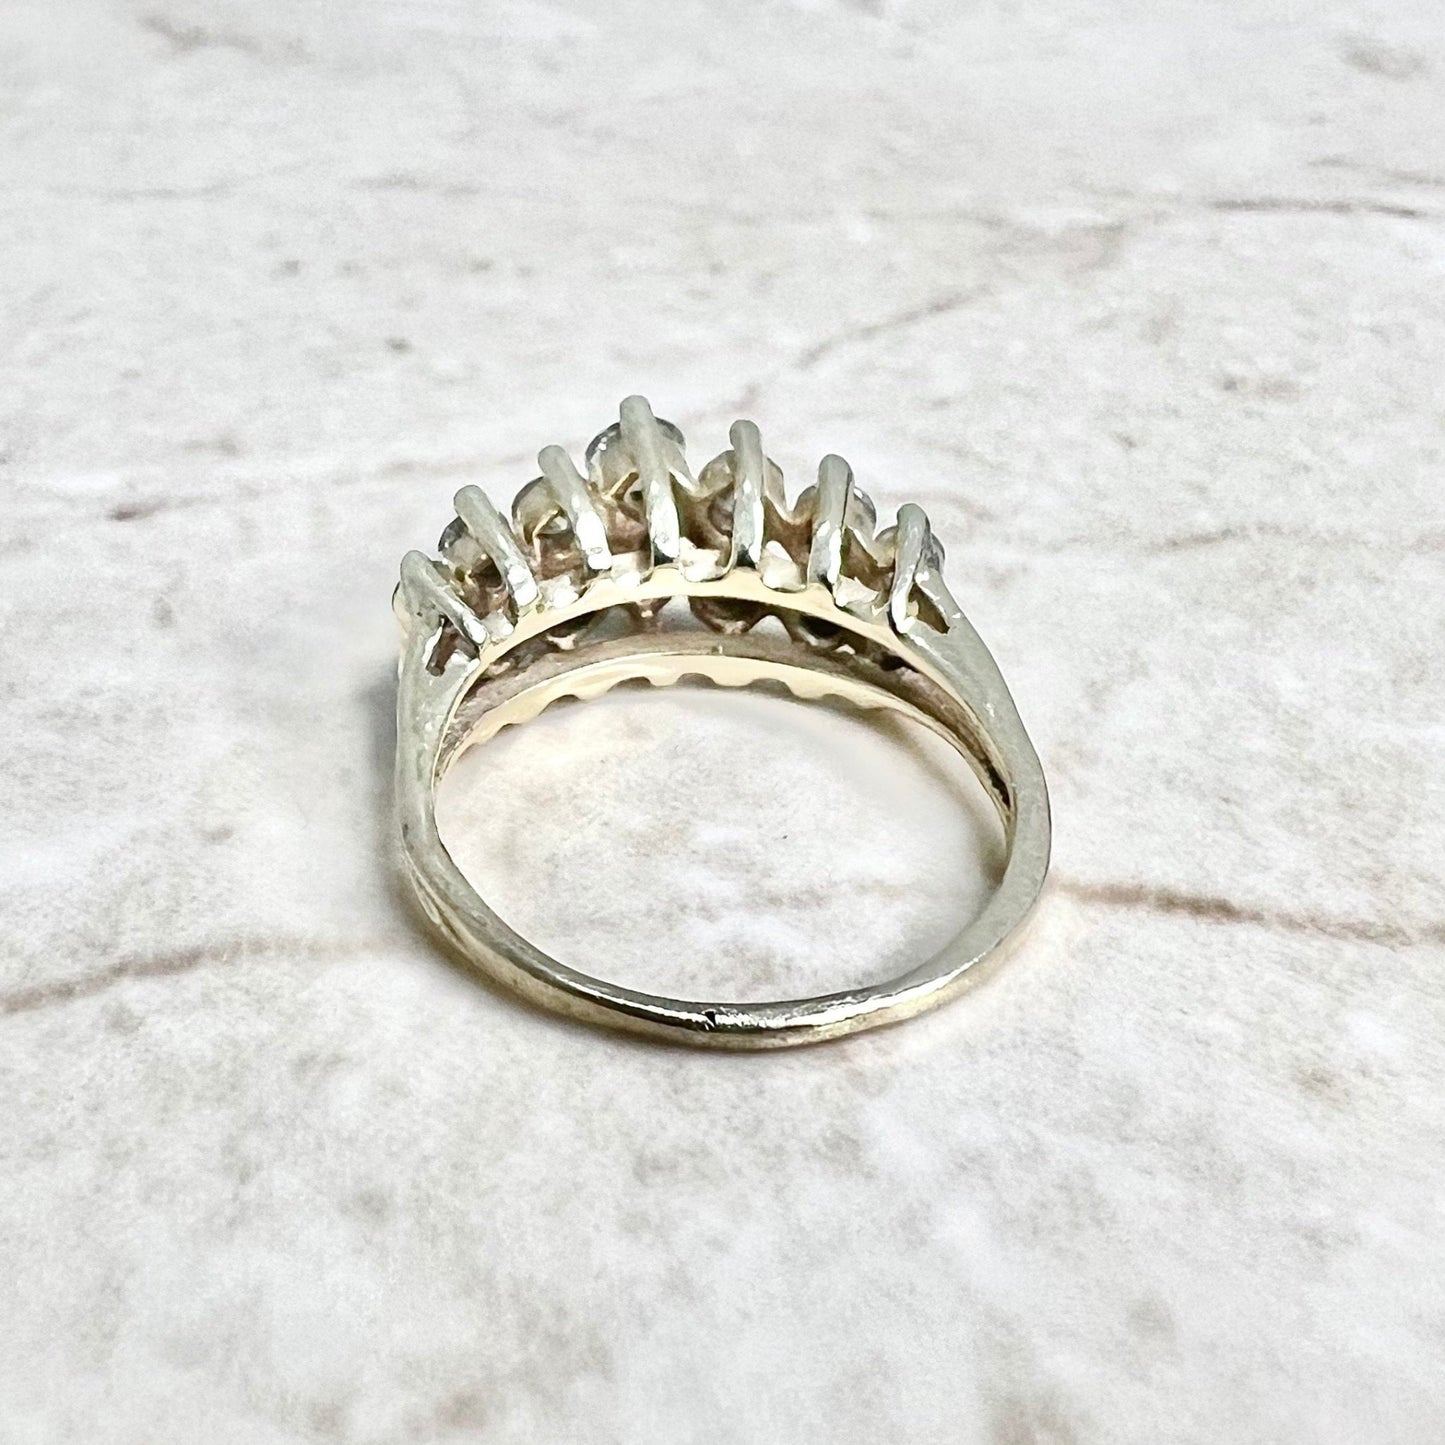 0.90 CTTW Vintage 14K Double Row Diamond Band Ring - Yellow Gold Diamond Ring - Diamond Wedding Ring - Anniversary Ring - Best Gifts For Her